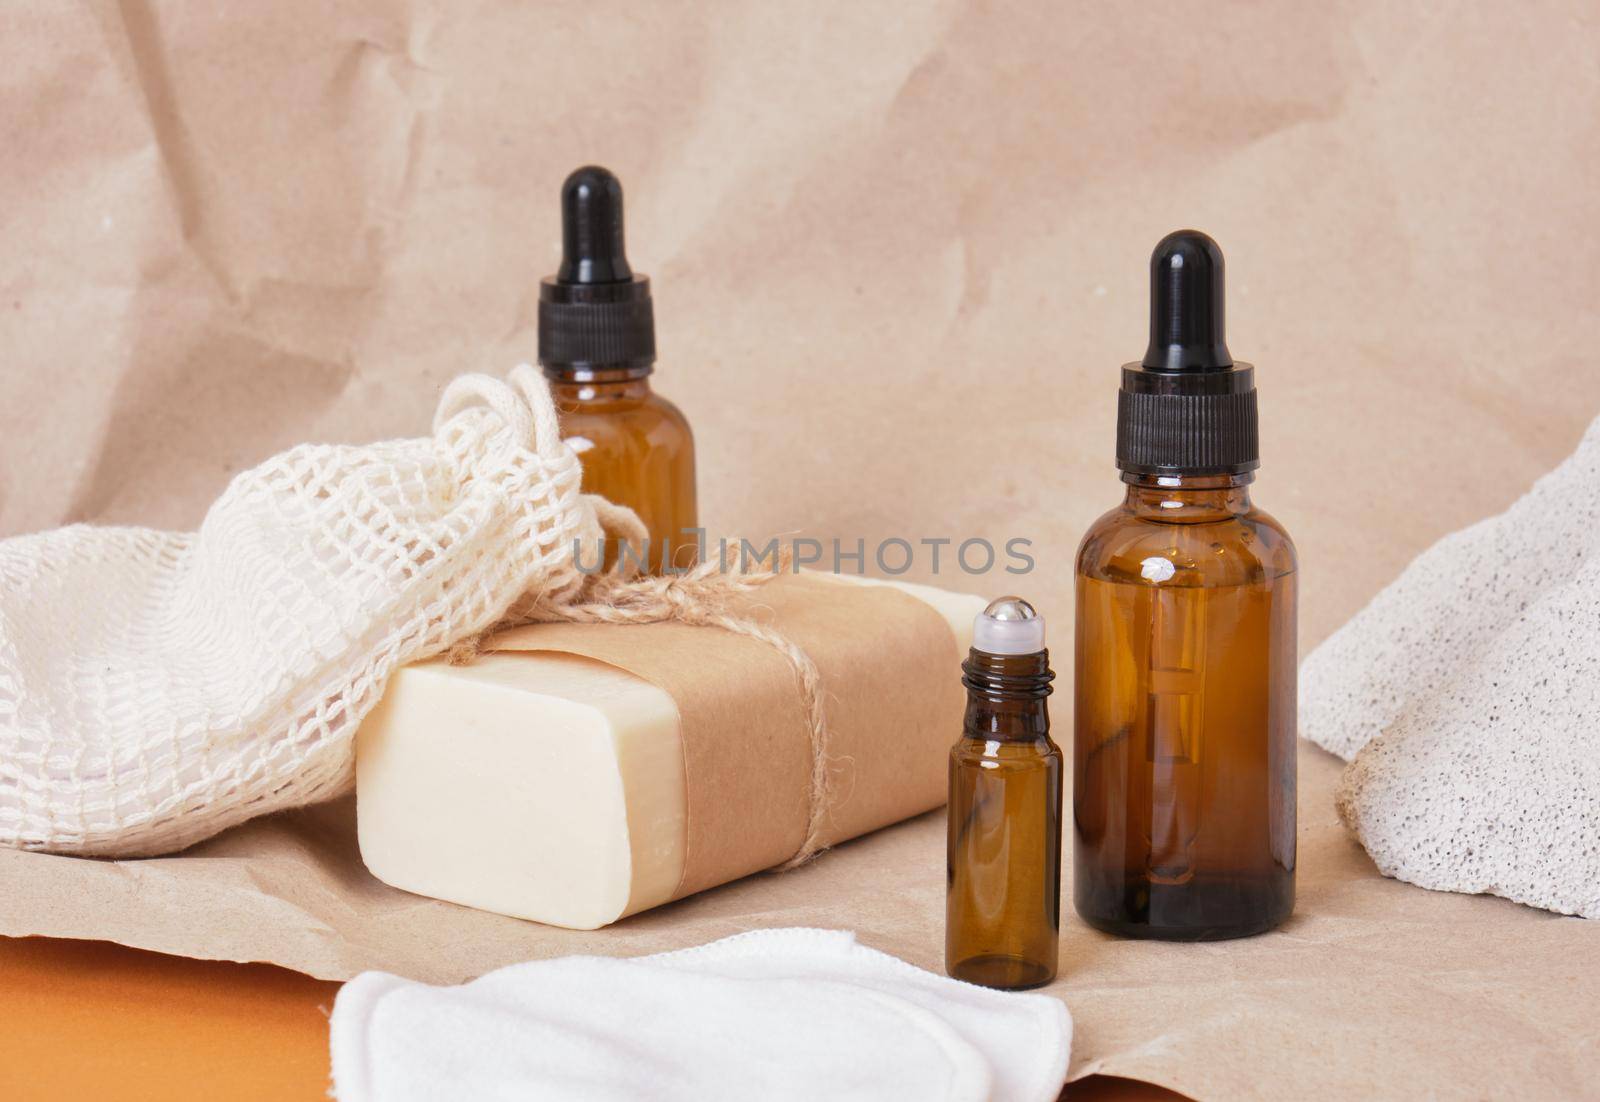 Set of natural organic SPA beauty products amber bottle oil, homemade soap, reusable cotton eco-friendly facial sponges and glass cosmetic container with roll-on